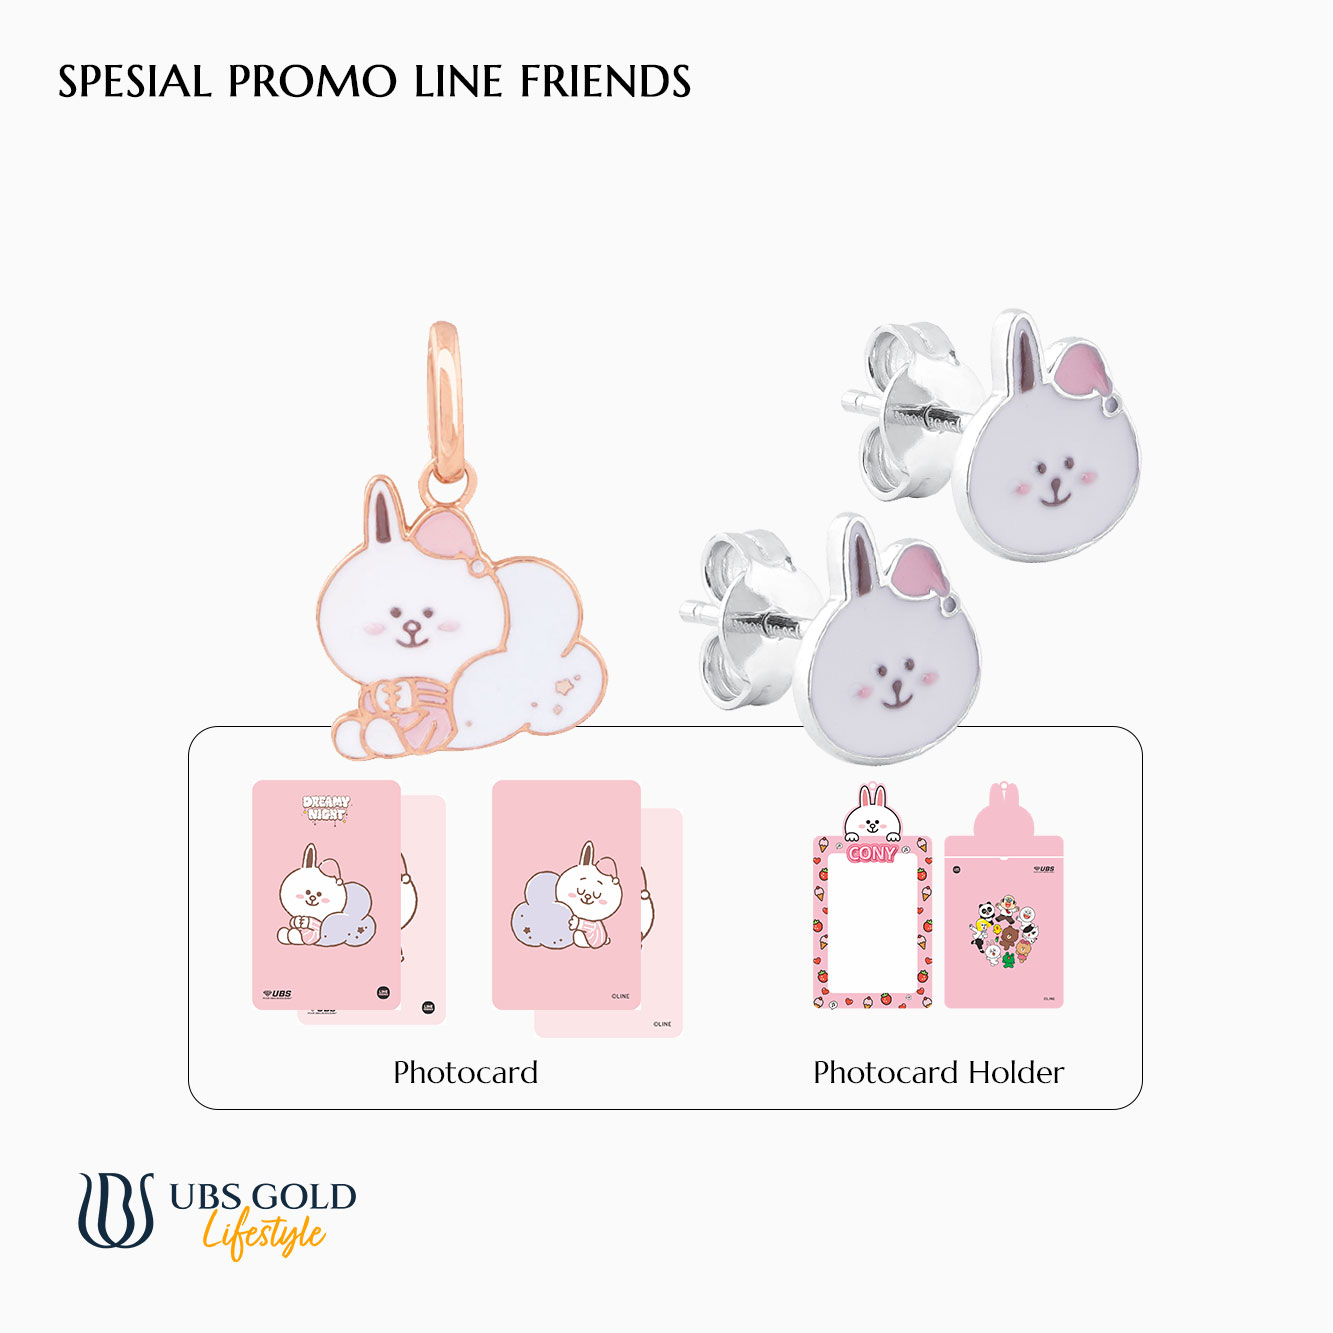 UBS Spesial Promo Line Friends Cony